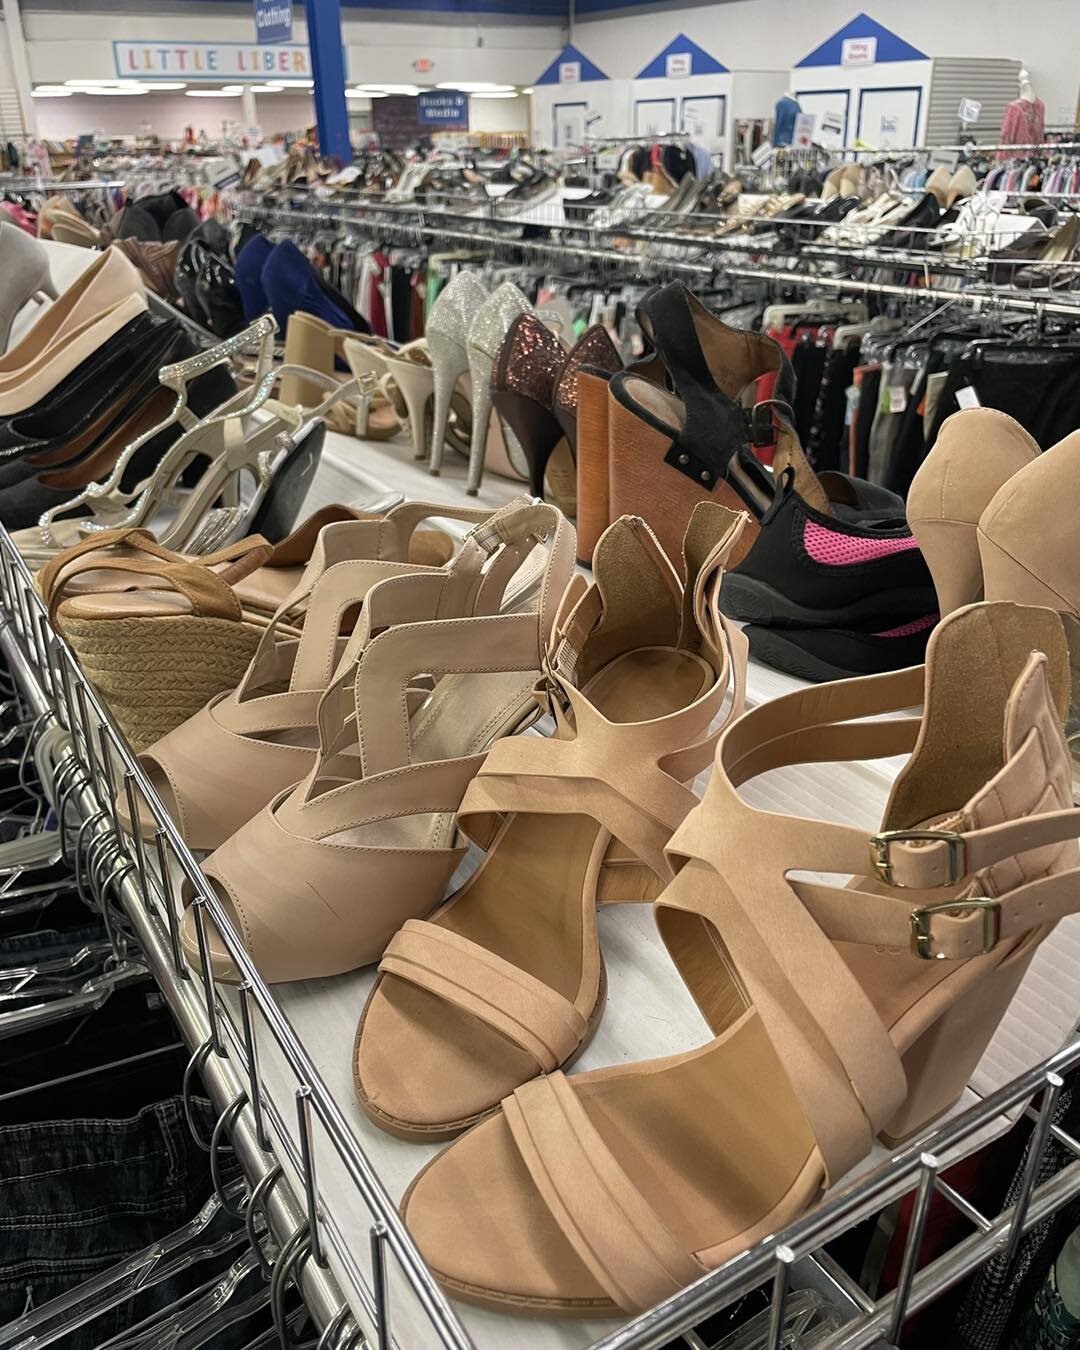 Get dressed up to go out for a fun dinner or friend&rsquo;s night while being thrifty about it! 

.
.
.
When you purchase, donate, or volunteer with any of our 7 thrift locations, you are directly supporting the work and mission of Liberty Ministries